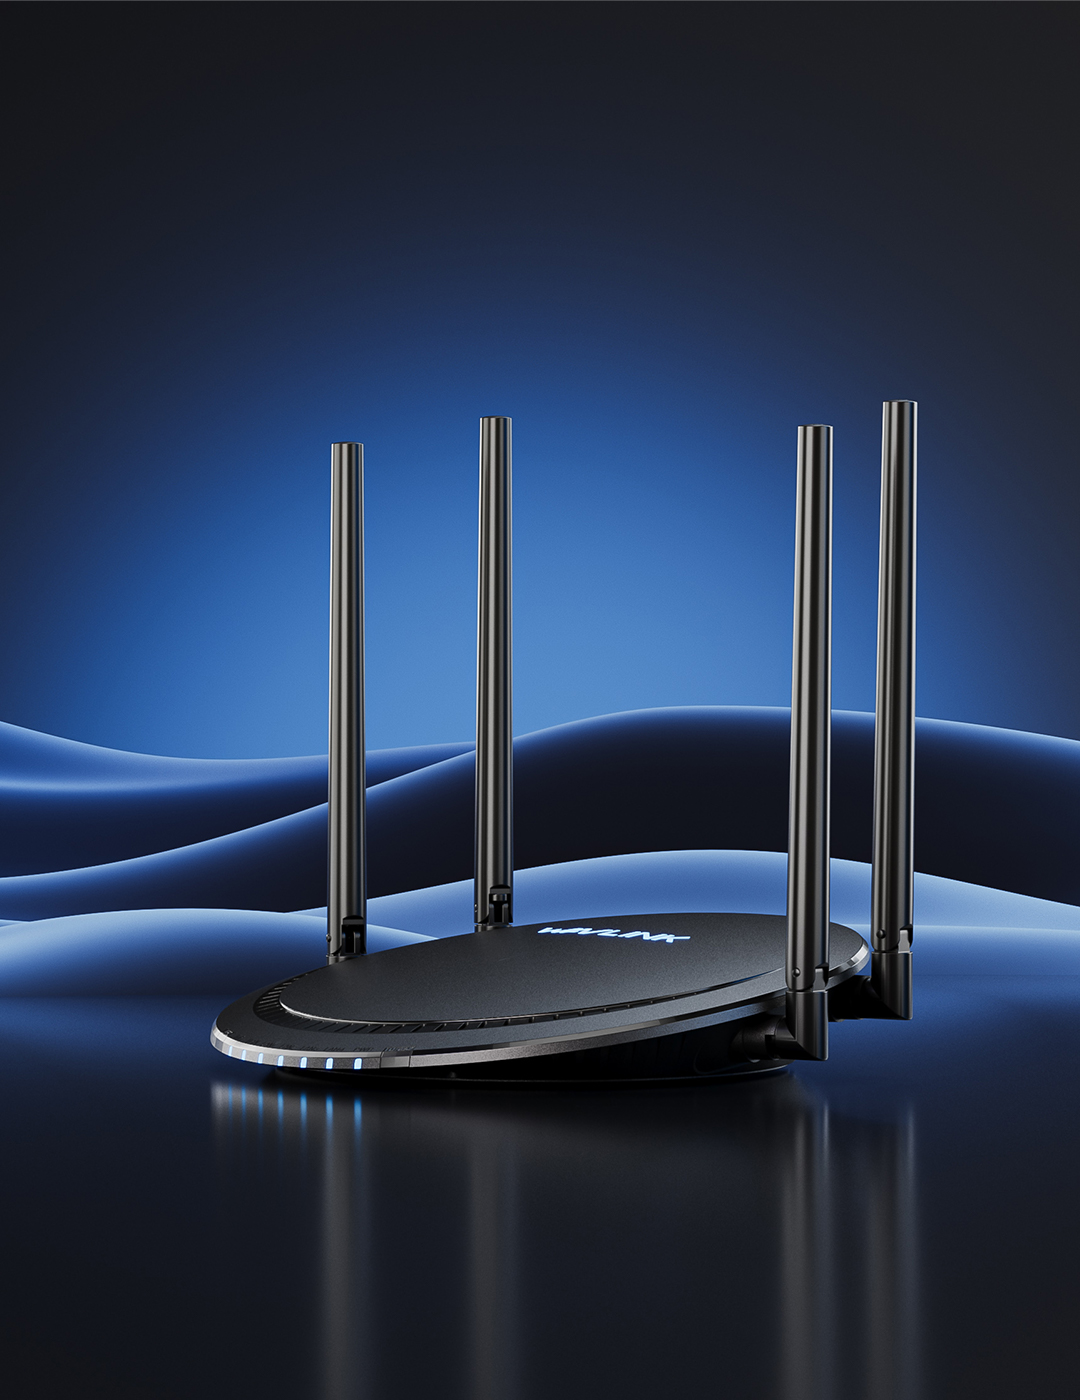 AX3000 WIFI6 Router 2.4GHz 573Mbps and 5GHz 2402Mbps connections Supports  802.11ax/ac/a/n/g/b standards TouchLink Easily Connect, No Passwords  Required - Home and Business Networking Equipment &Wireless Audio and Video  Transmission Equipment 